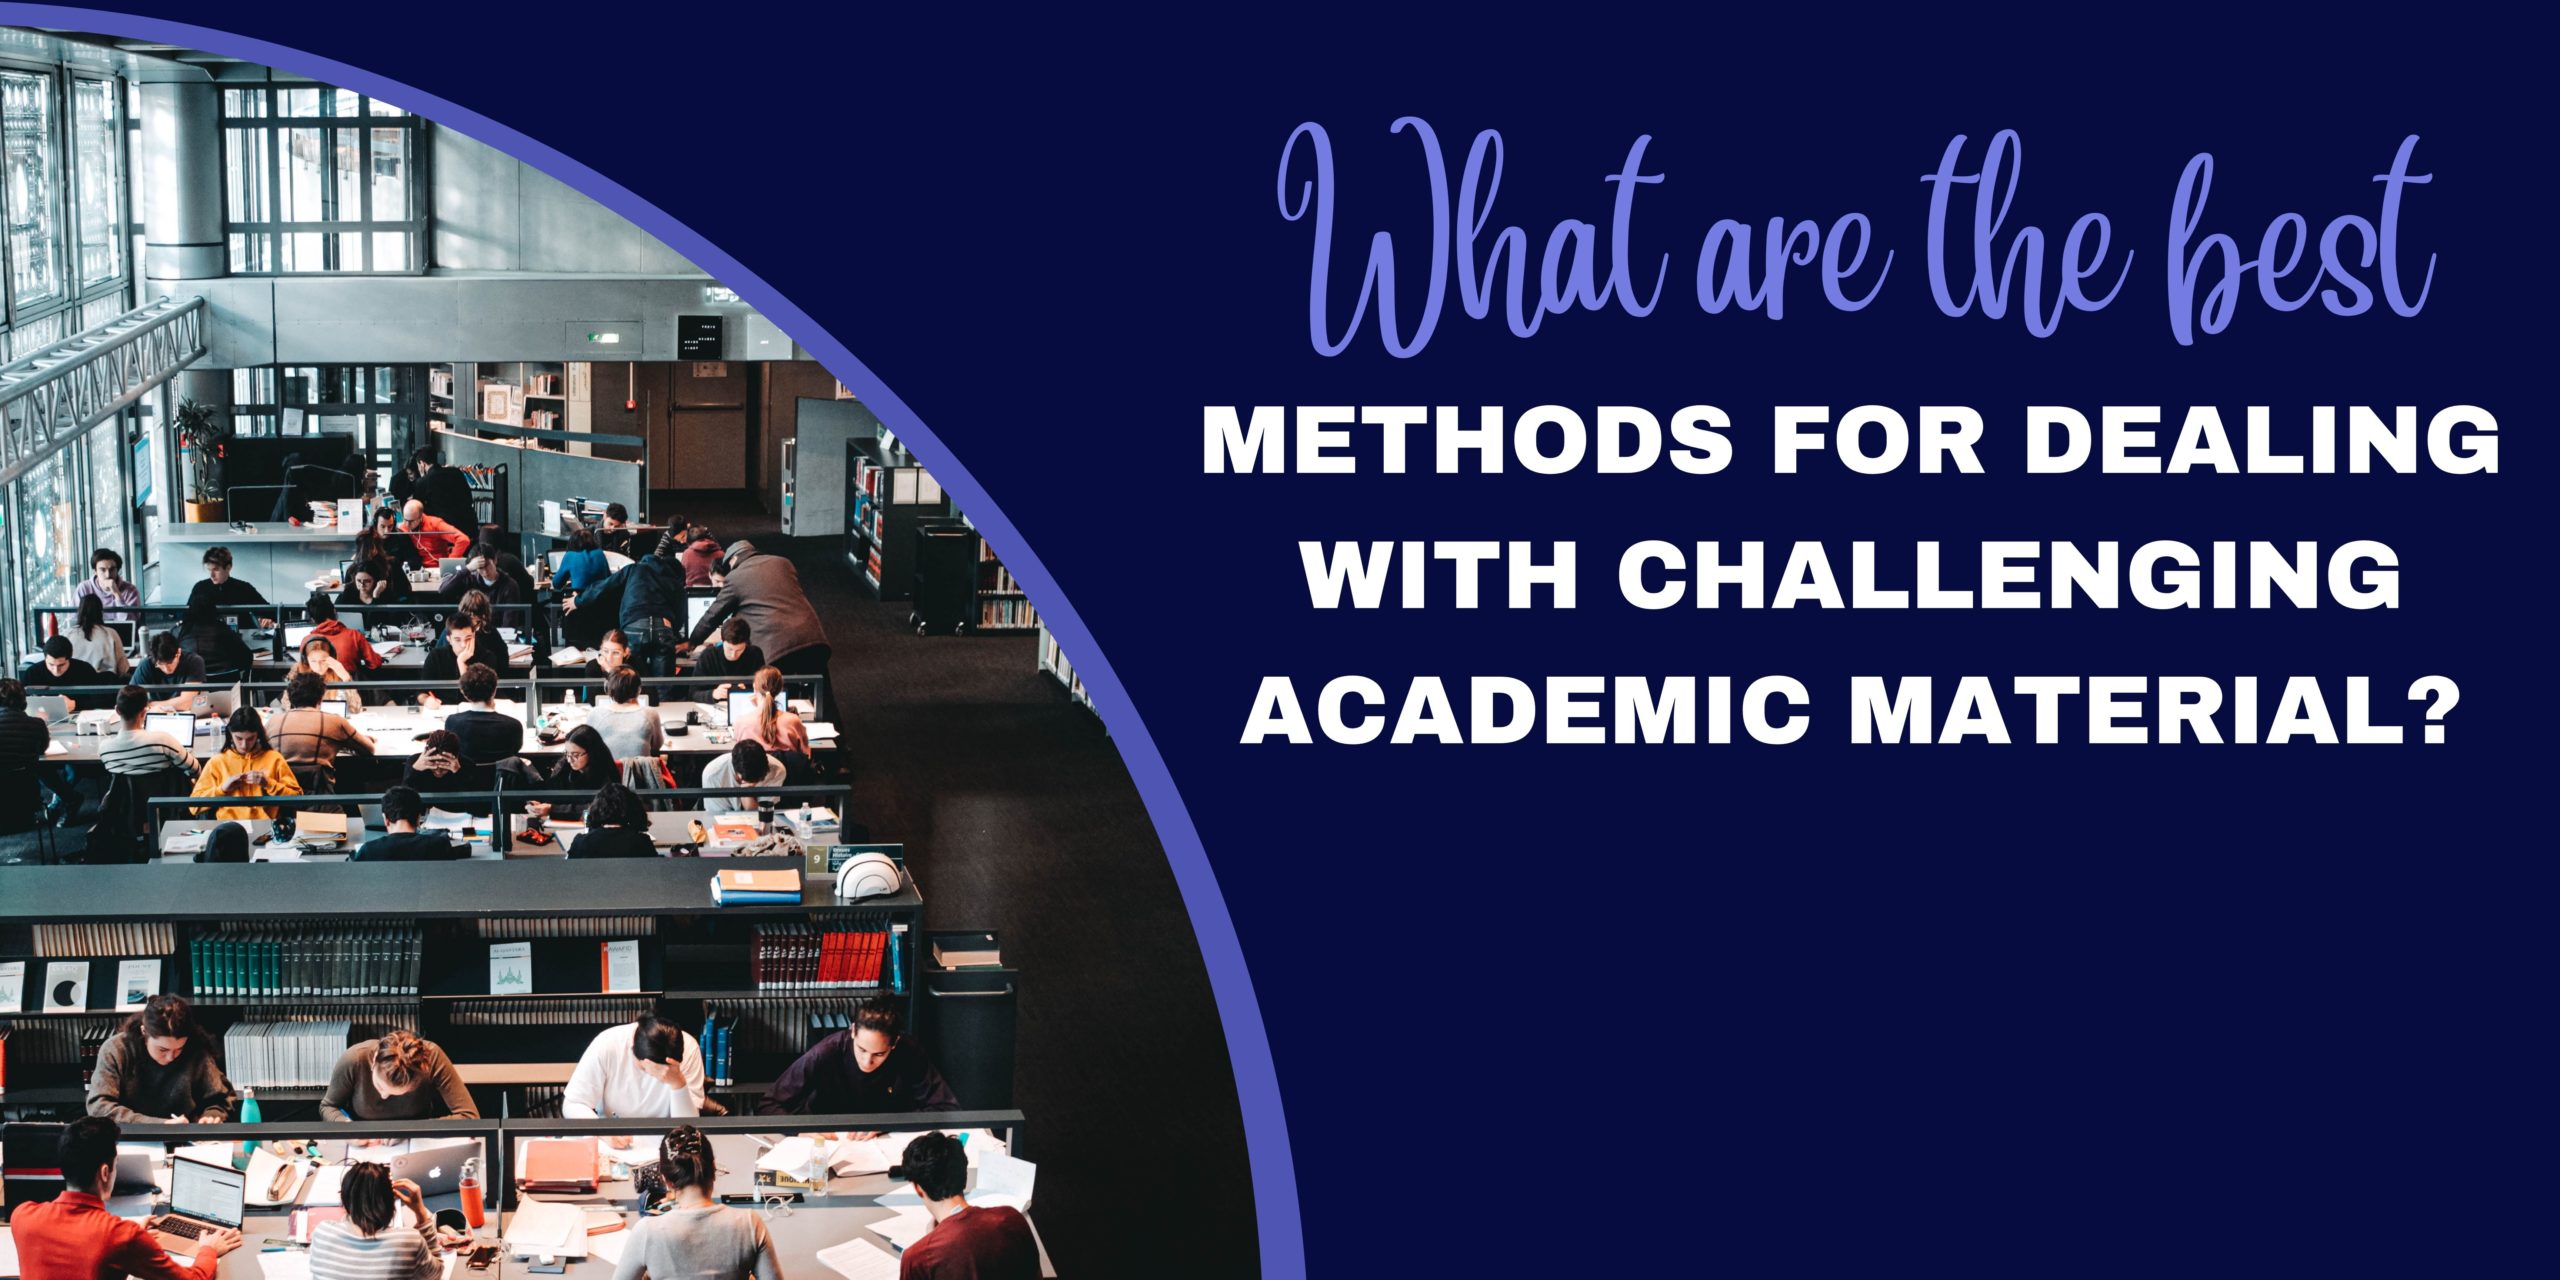 What are the best methods for dealing with challenging academic material?